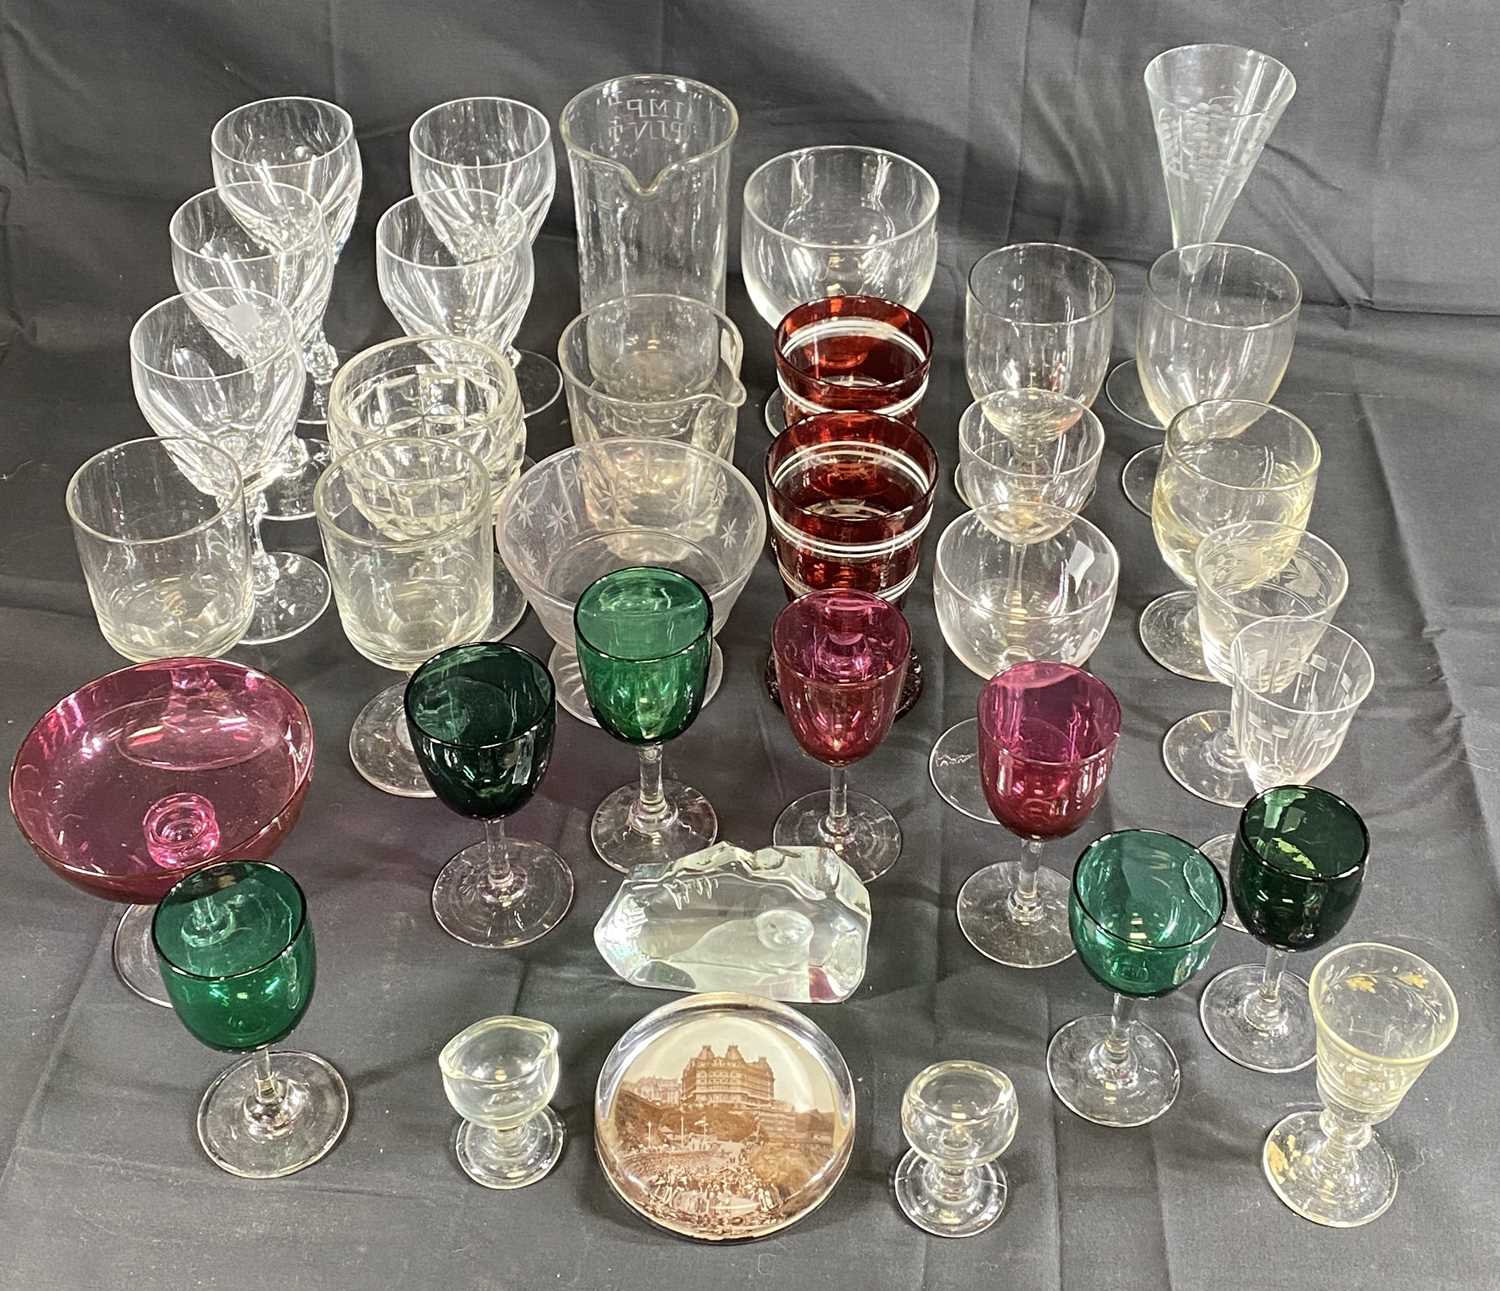 19TH CENTURY & LATER GLASSWARE - to include rummers, Cranberry and other colourful glassware, - Image 2 of 2